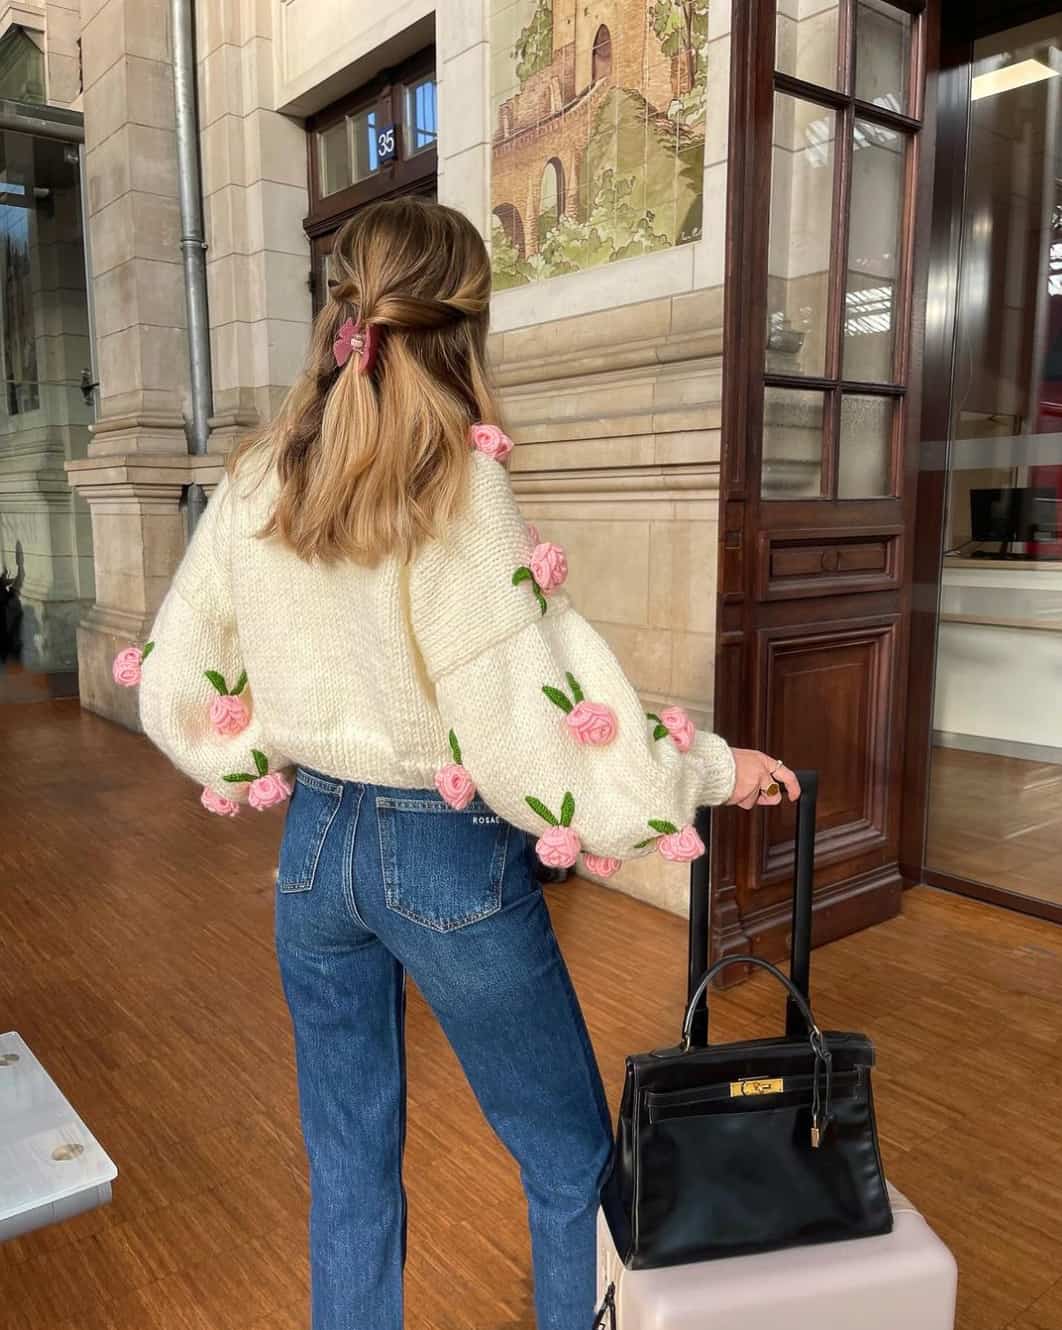 A woman wearing medium blue jeans and a puffed sleeve ivory sweater with pink roses